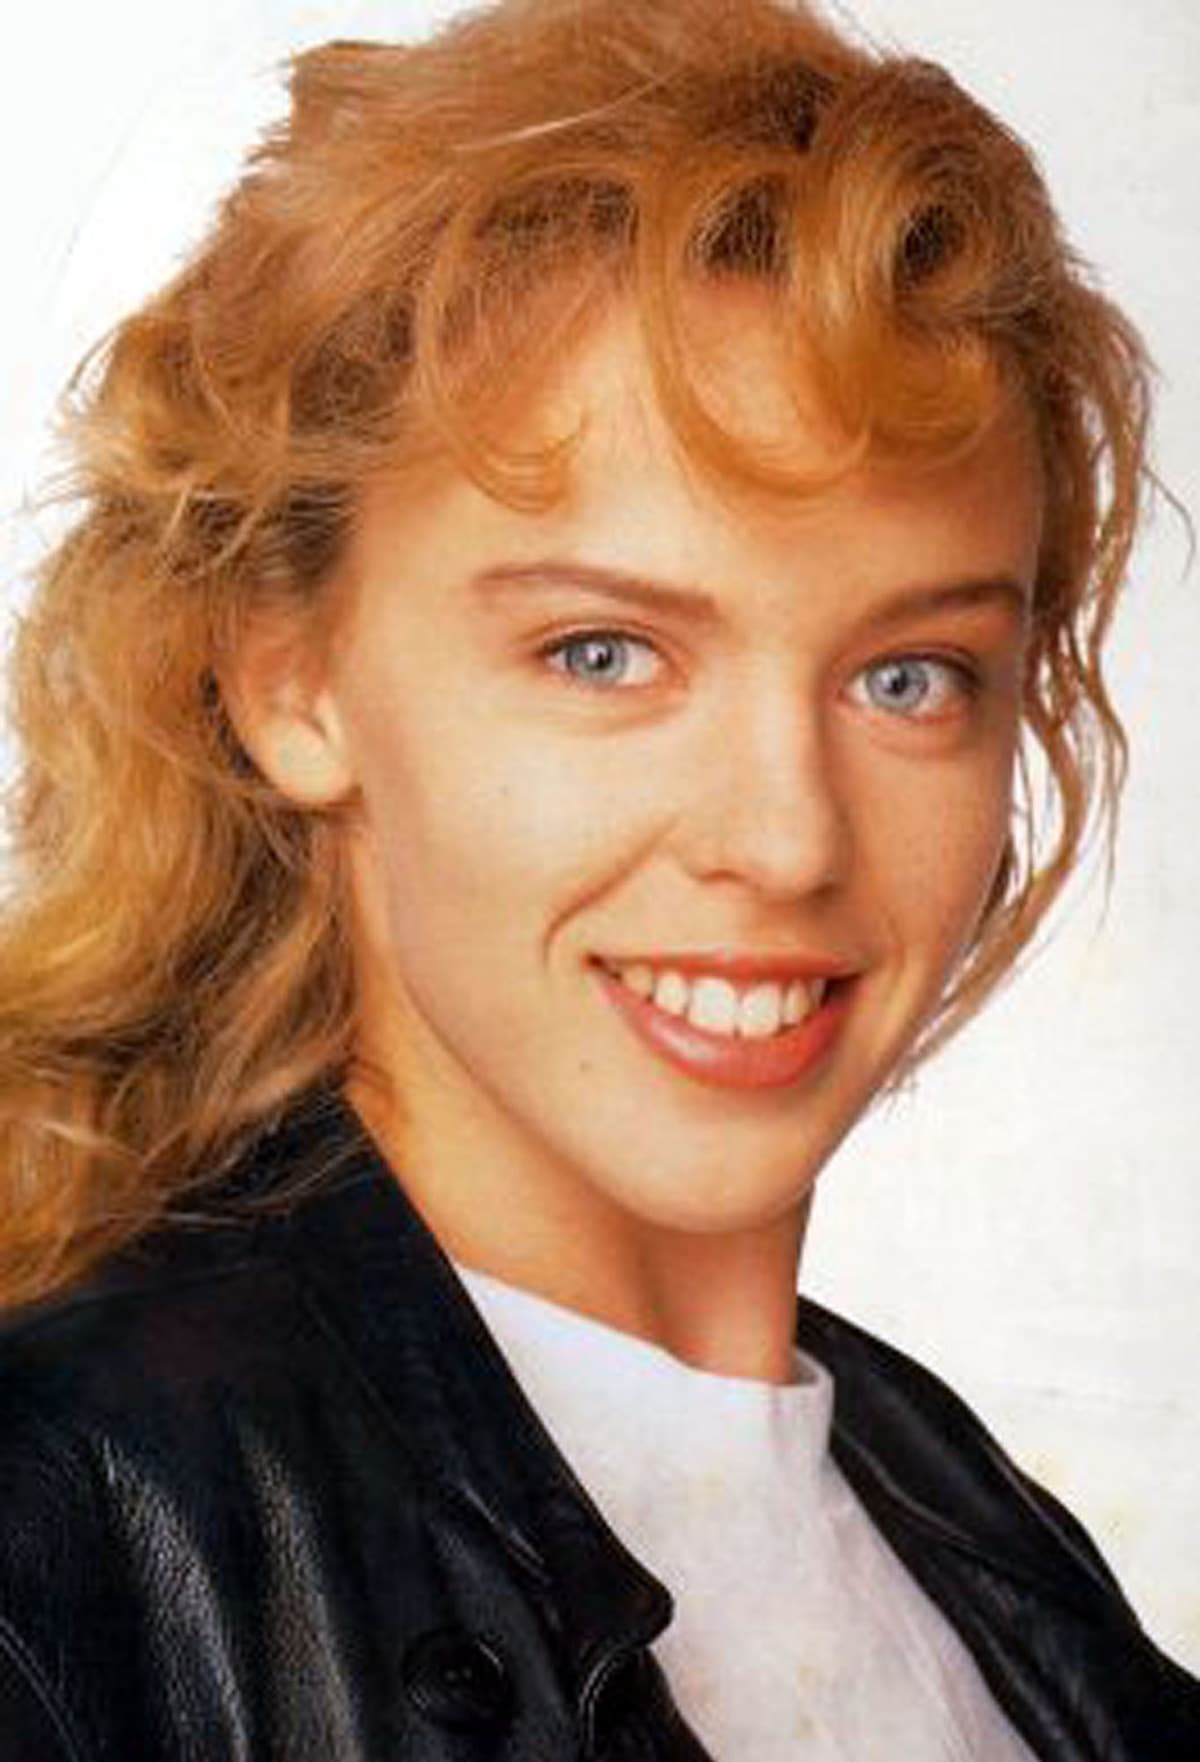 Kylie Minogue portrayed the feisty, quick-tempered, and outspoken tomboy Charlene Robinson in Neighbours